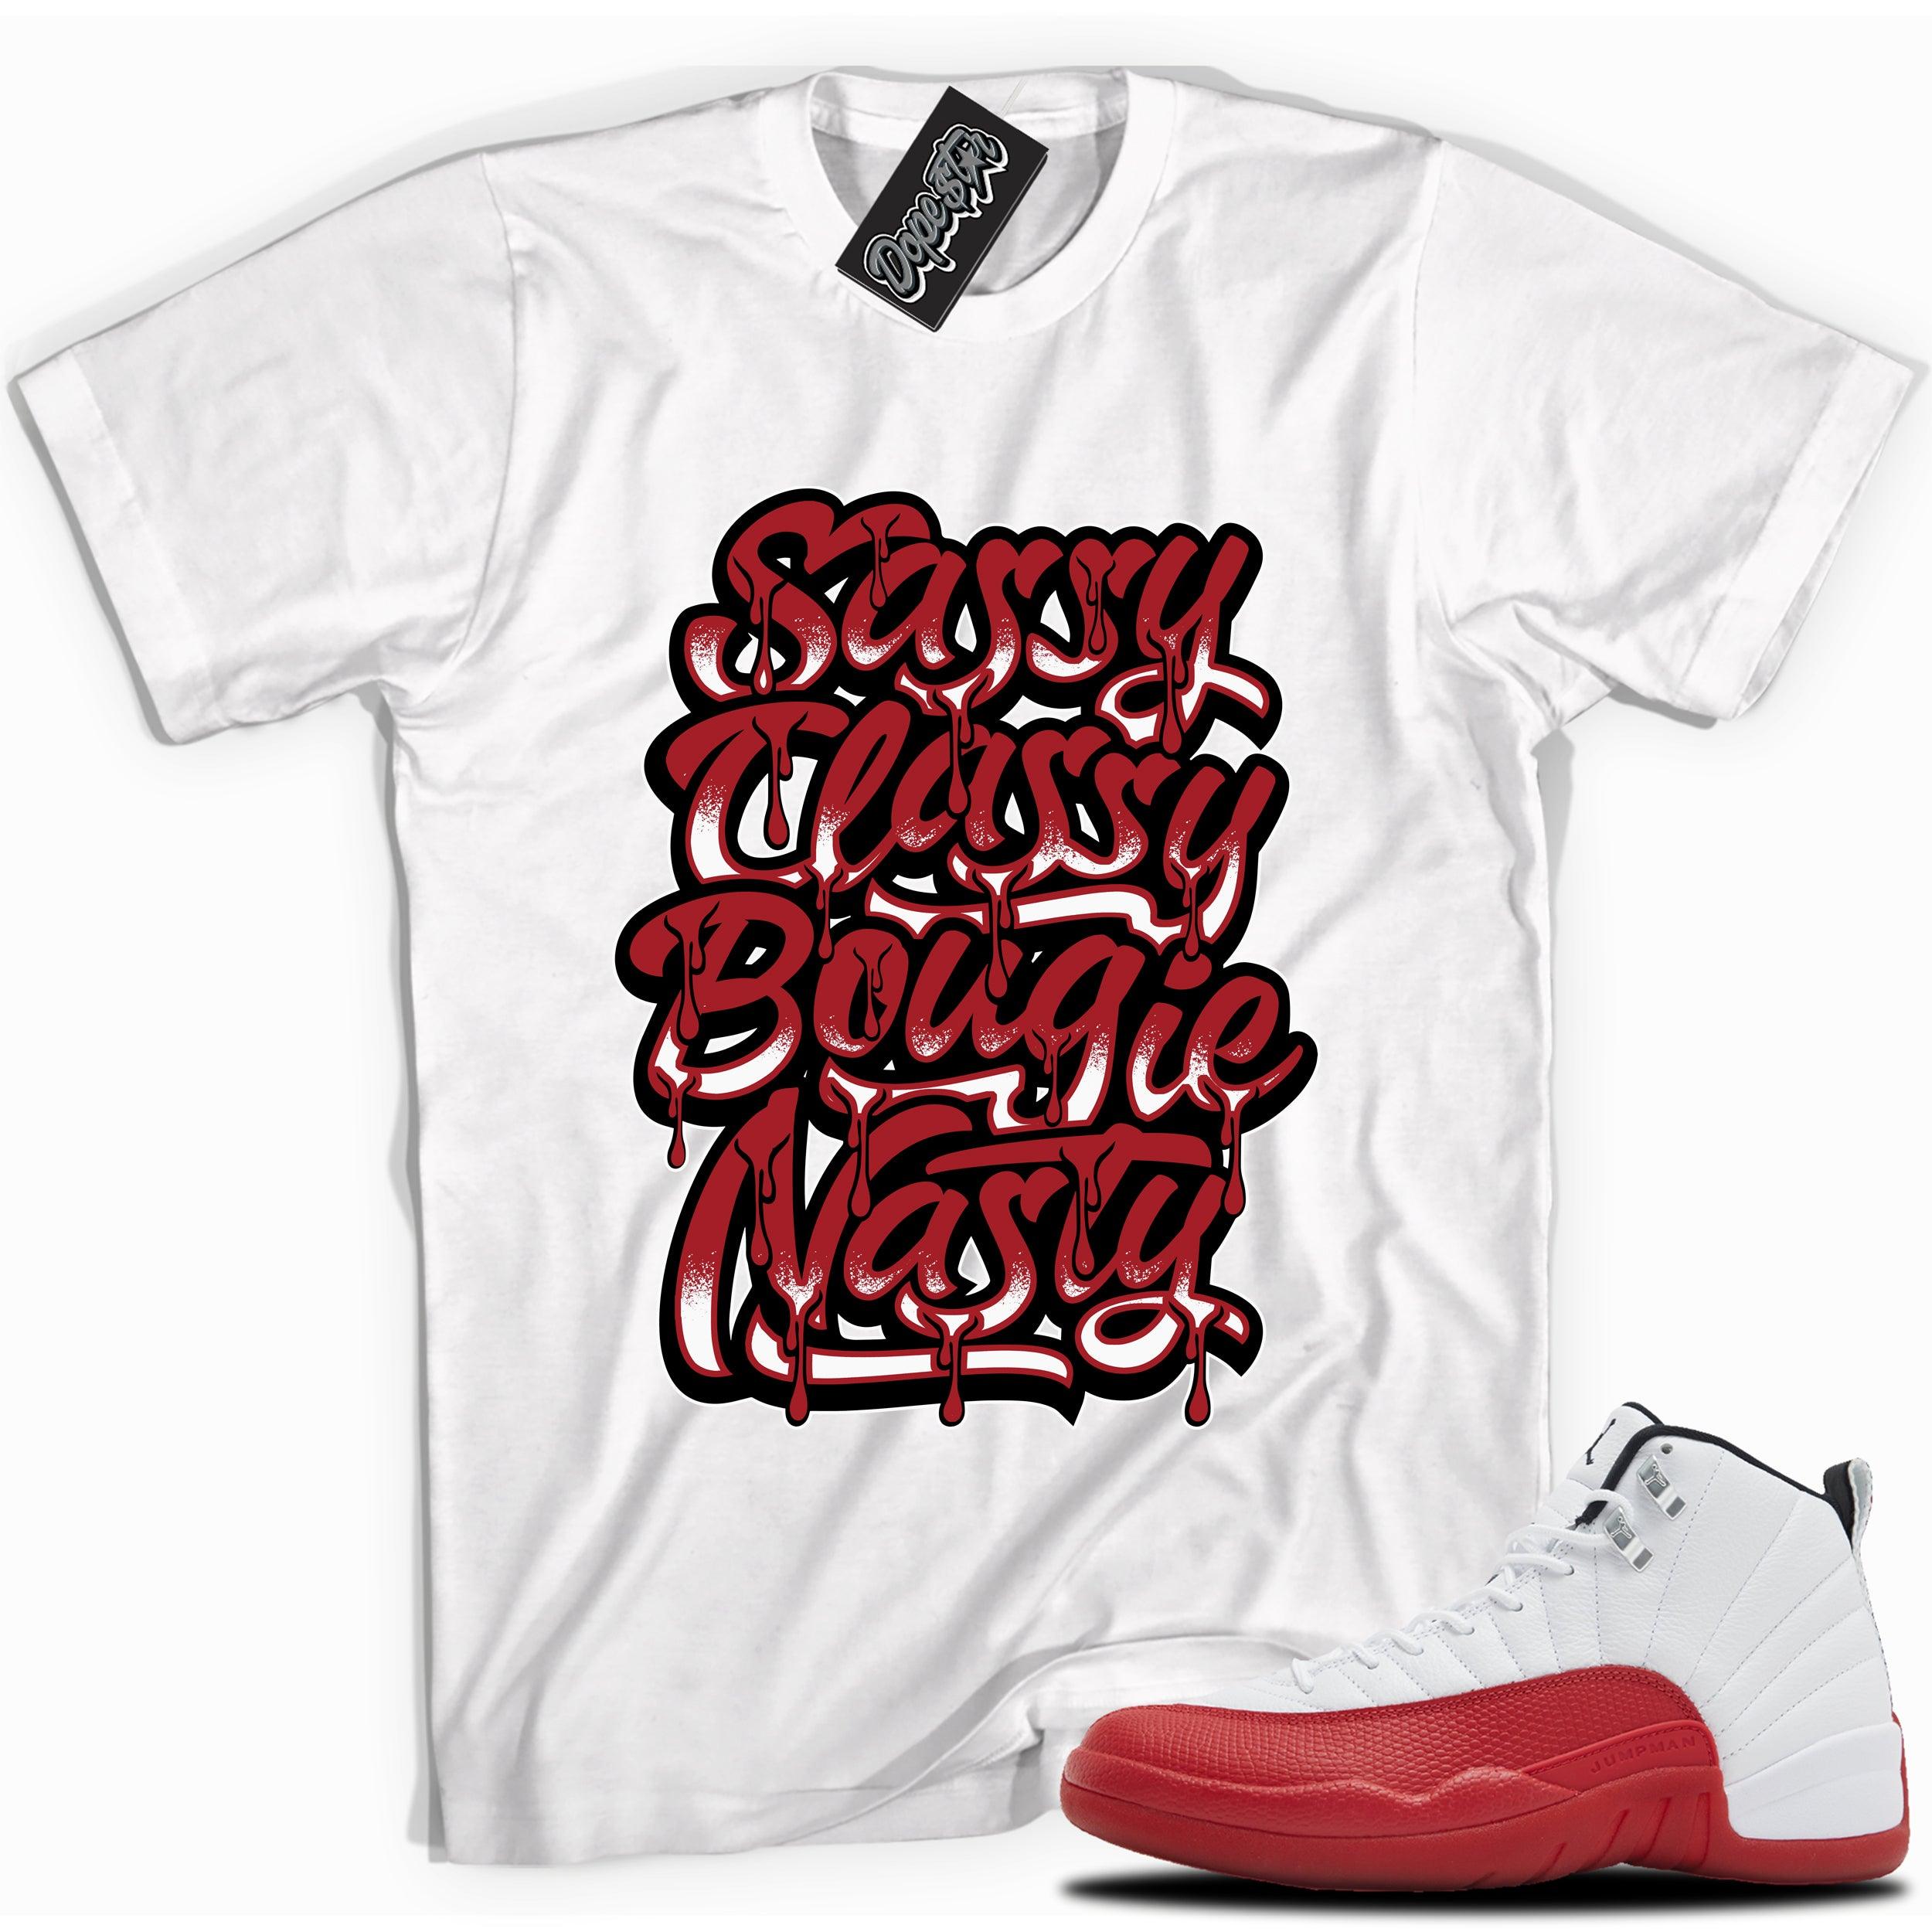 Cool White graphic tee with “SASSY CLASSY” print, that perfectly matches Air Jordan 12 Retro Cherry Red 2023 red and white sneakers 